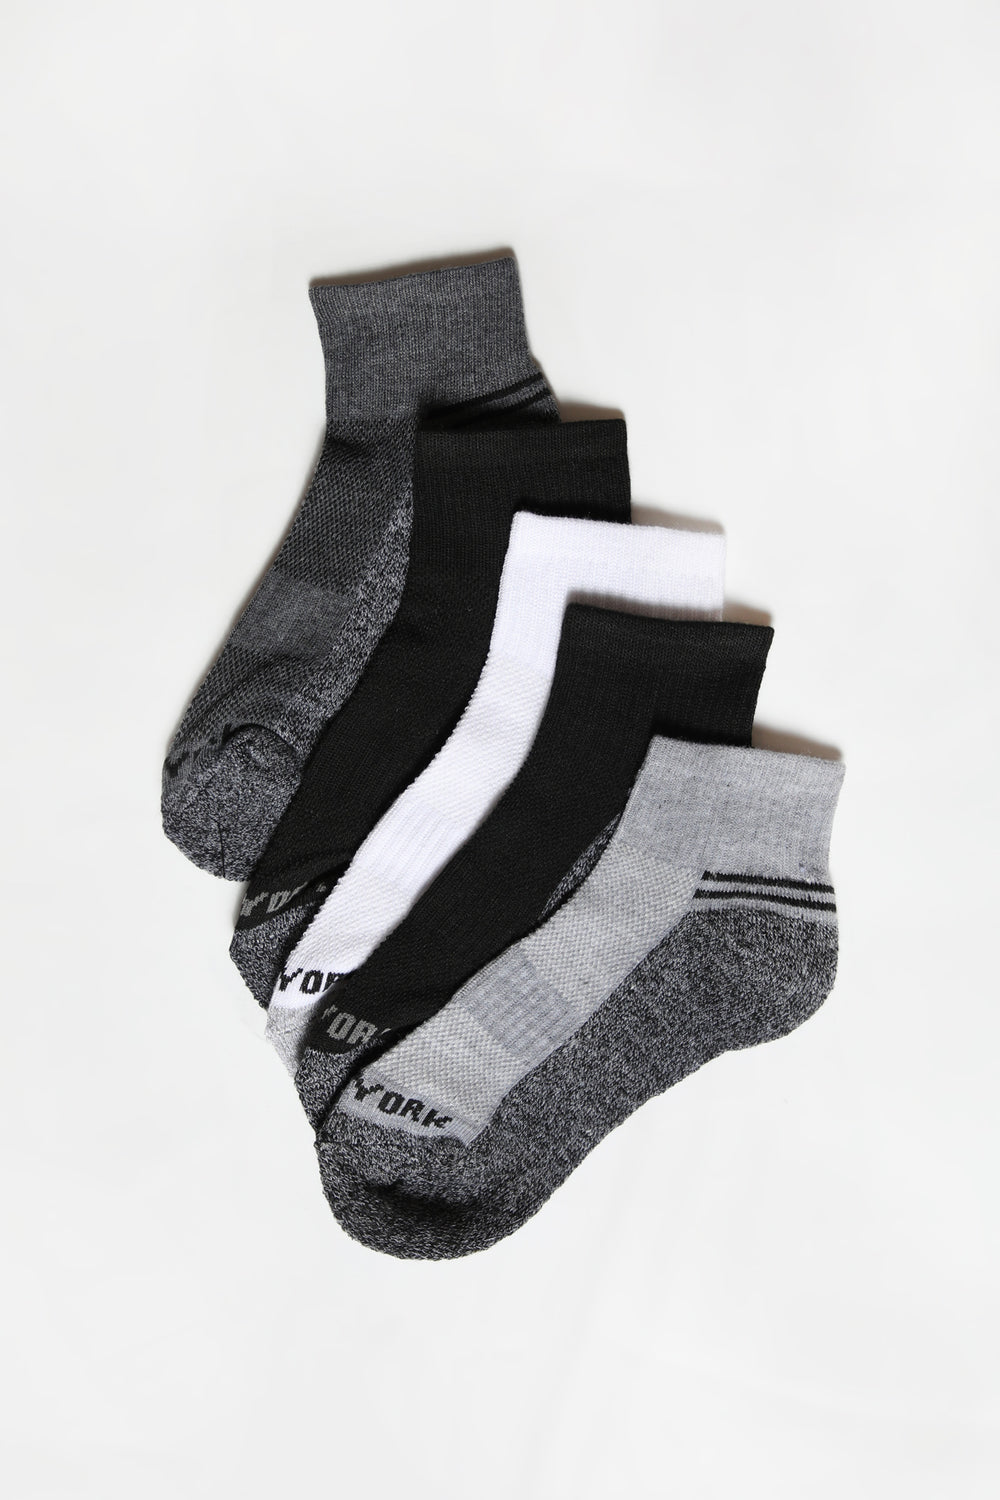 Zoo York Youth 5-Pack Athletic Ankle Socks Black with White